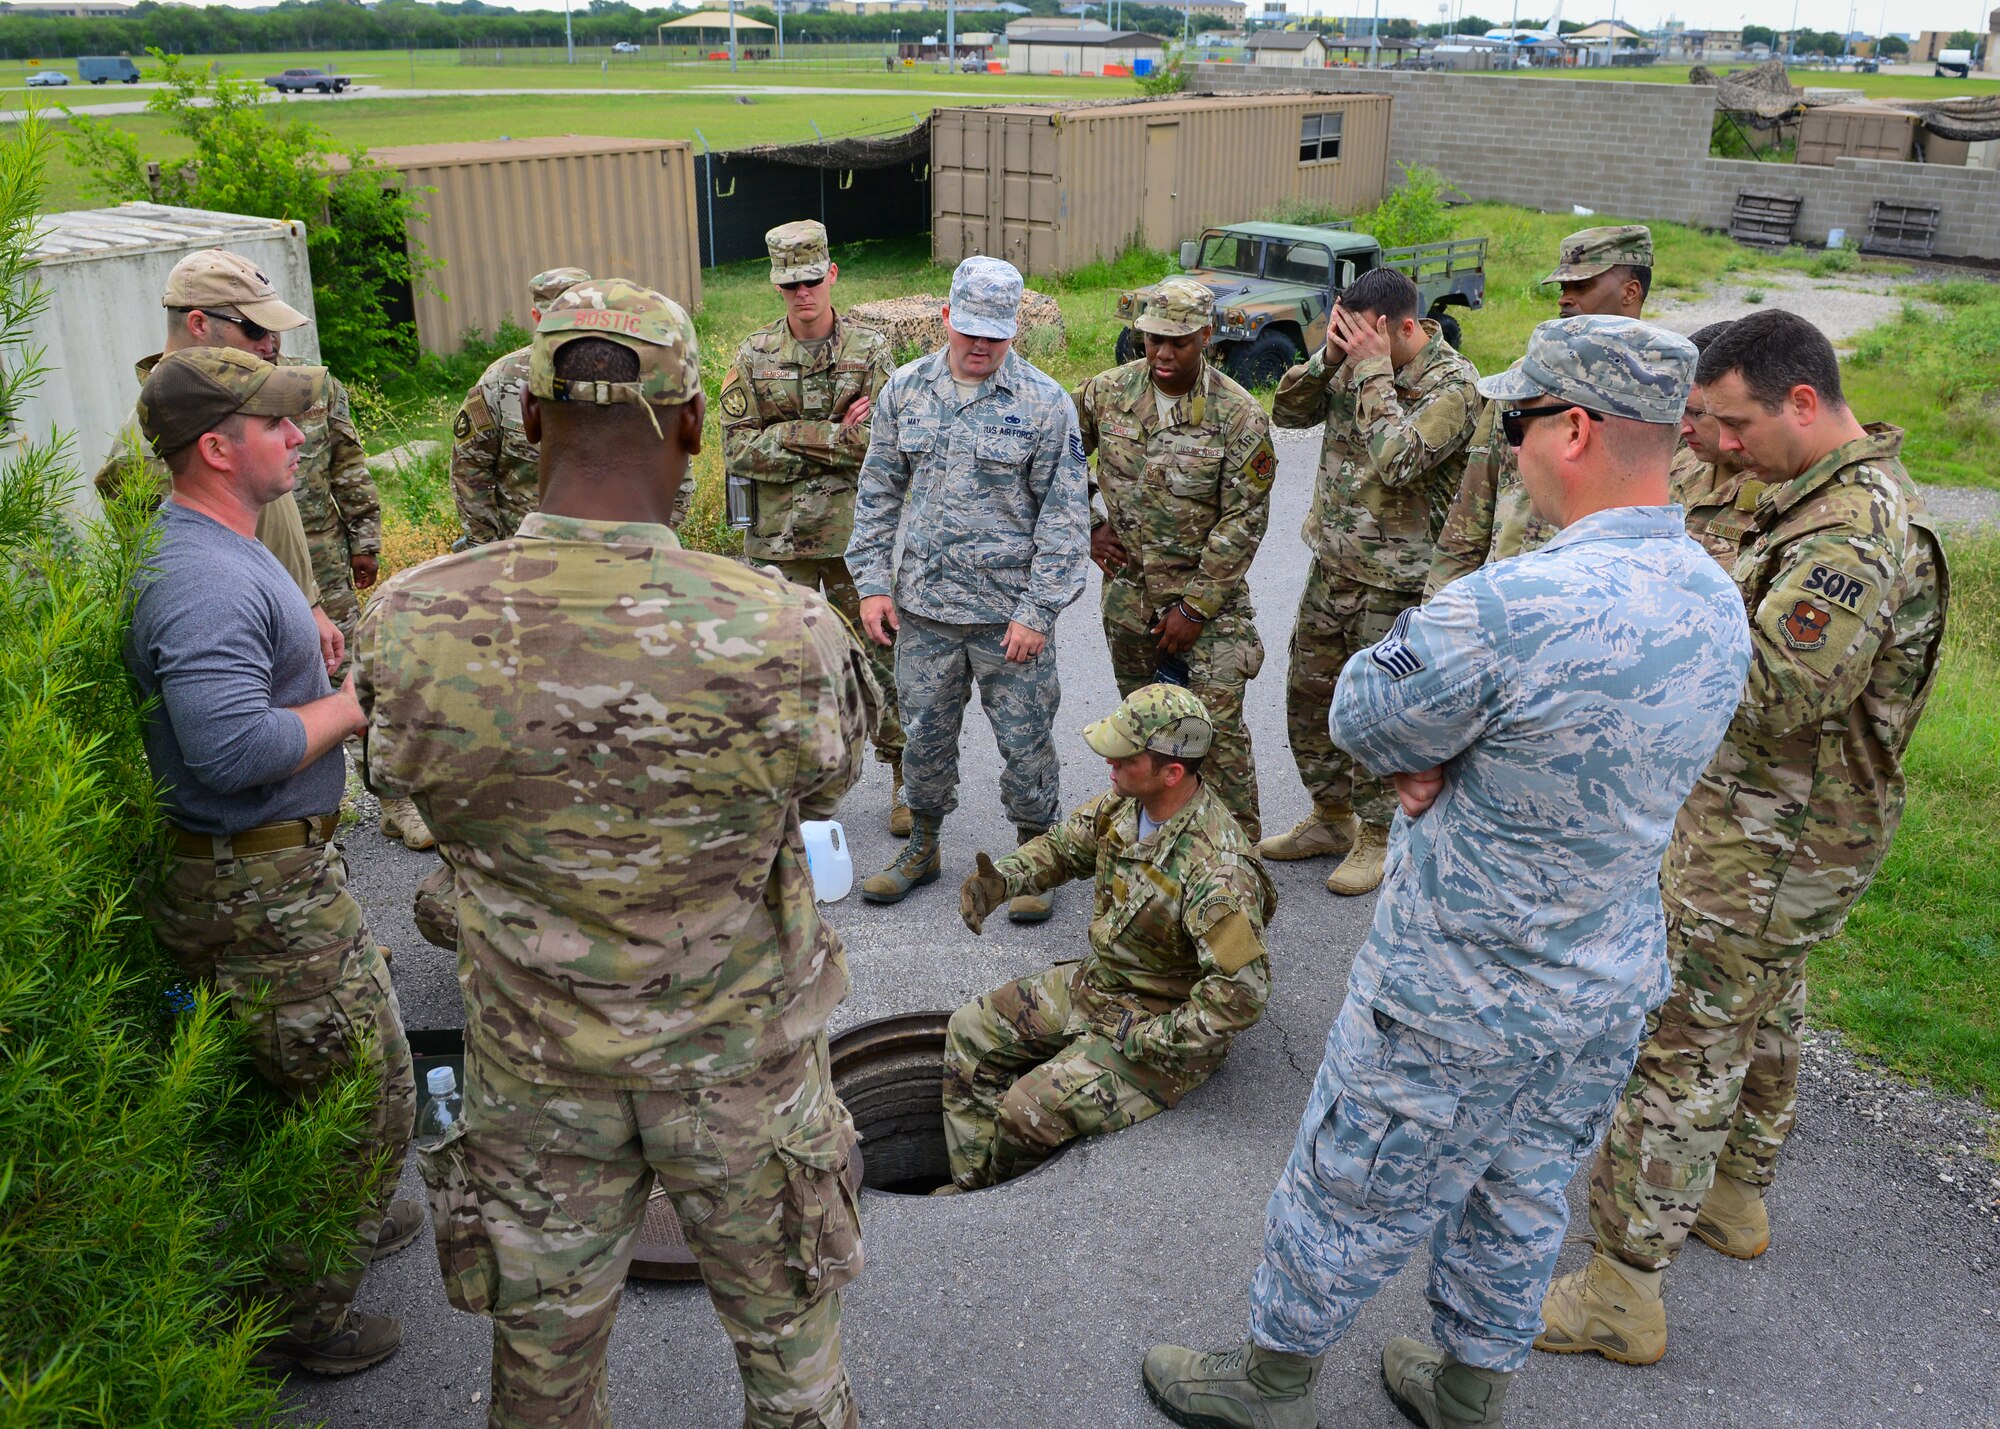 Master Sgt. Travis Mooney, center, cadre member from 66th Training Squadron, Det. 3, at Joint Base San Antonio-Lackland demonstrates how to descend into a manhole, June 3, 2019. Survival, Evasion, Resistance and Escape (SERE) cadre from are responsible for both the four-day Evasion and Conduct After Capture Course and the 15-day SERE Specialist Training Orientation Course at Joint Base San Antonio-Lackland. ECAC was the first stop for recruiters from the 330th RCS who travelled from across the United States to attend this biannual squadron training intended to immerse recruiters into  SERE training in order for them to be better able  to recruit Air Force SERE candidates.